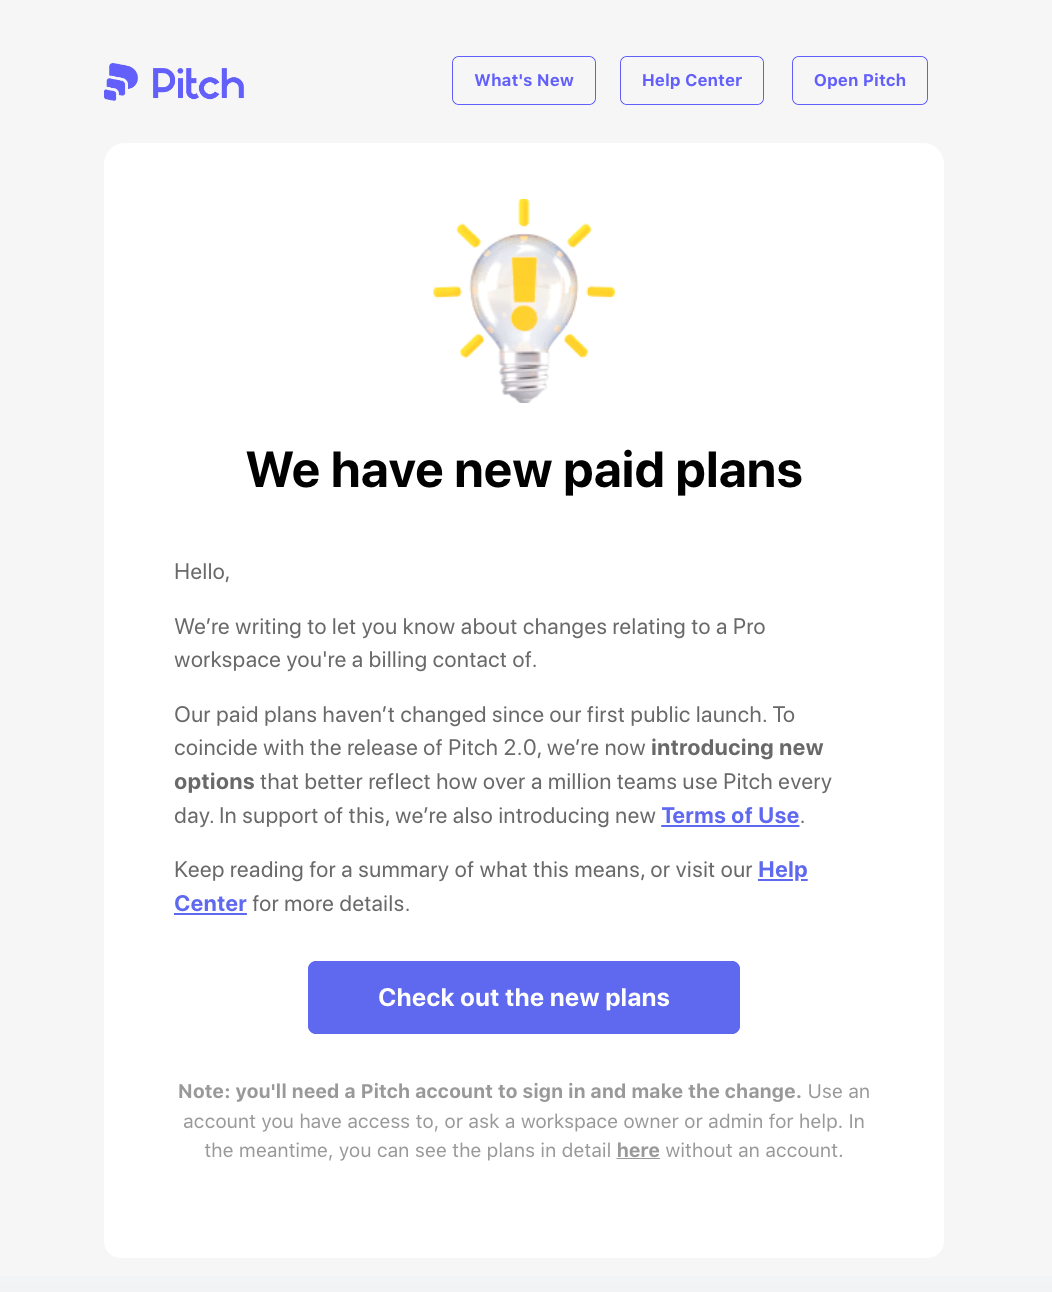 https://userlist.com/assets/illustrations/pricing-update-emails-saas-pitch-1.png